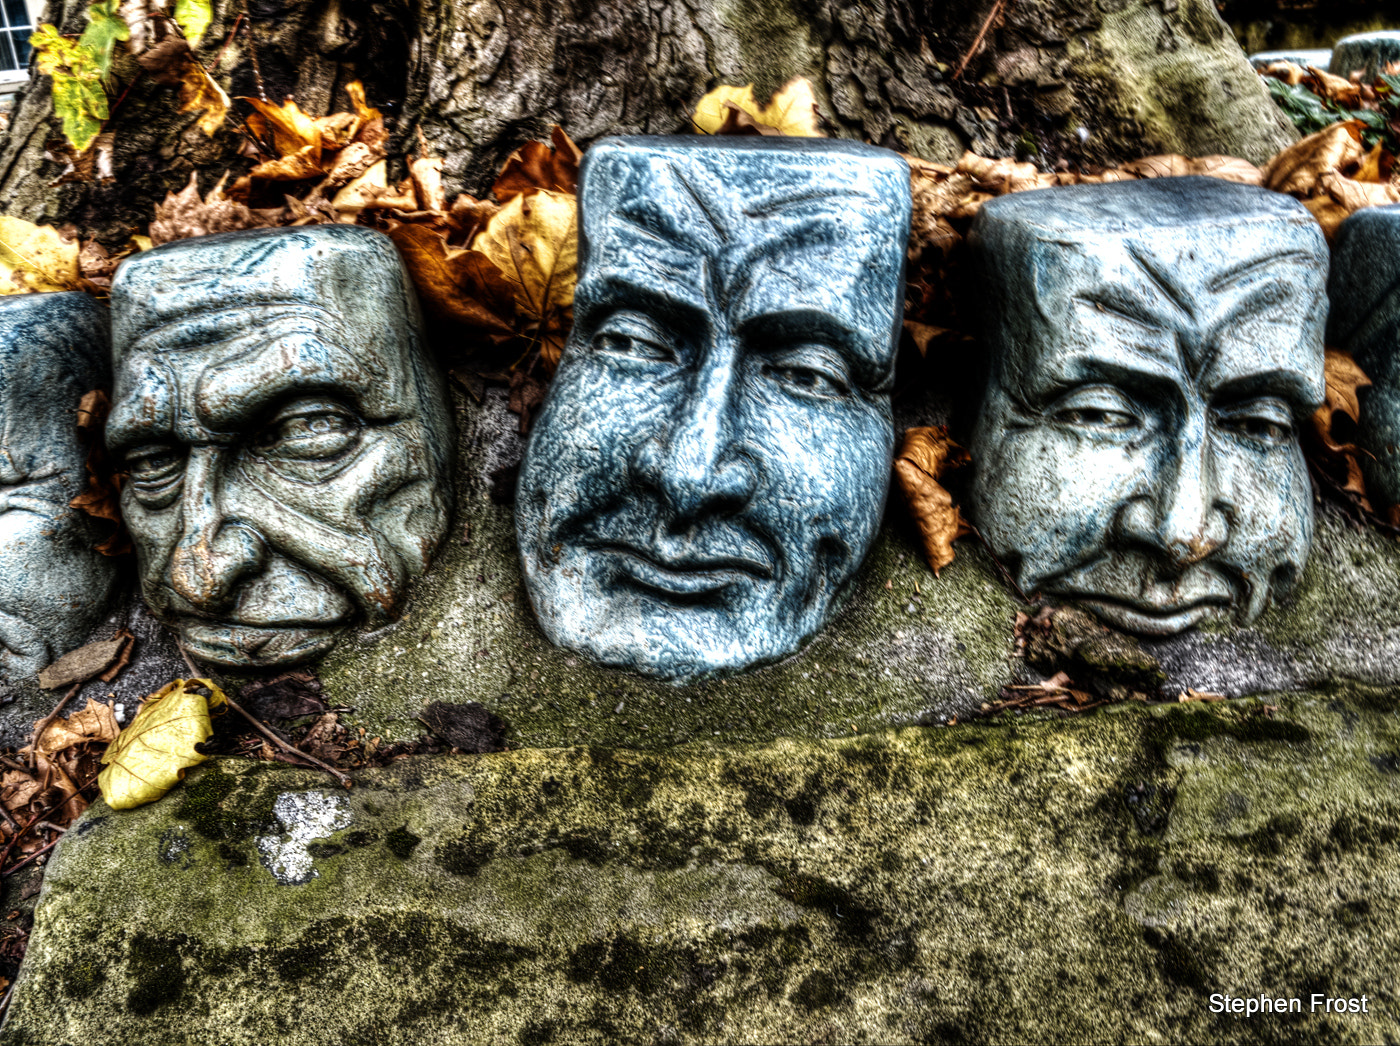 Olympus PEN E-PL5 sample photo. Stone faced : discovered these faces around a tree ... photography